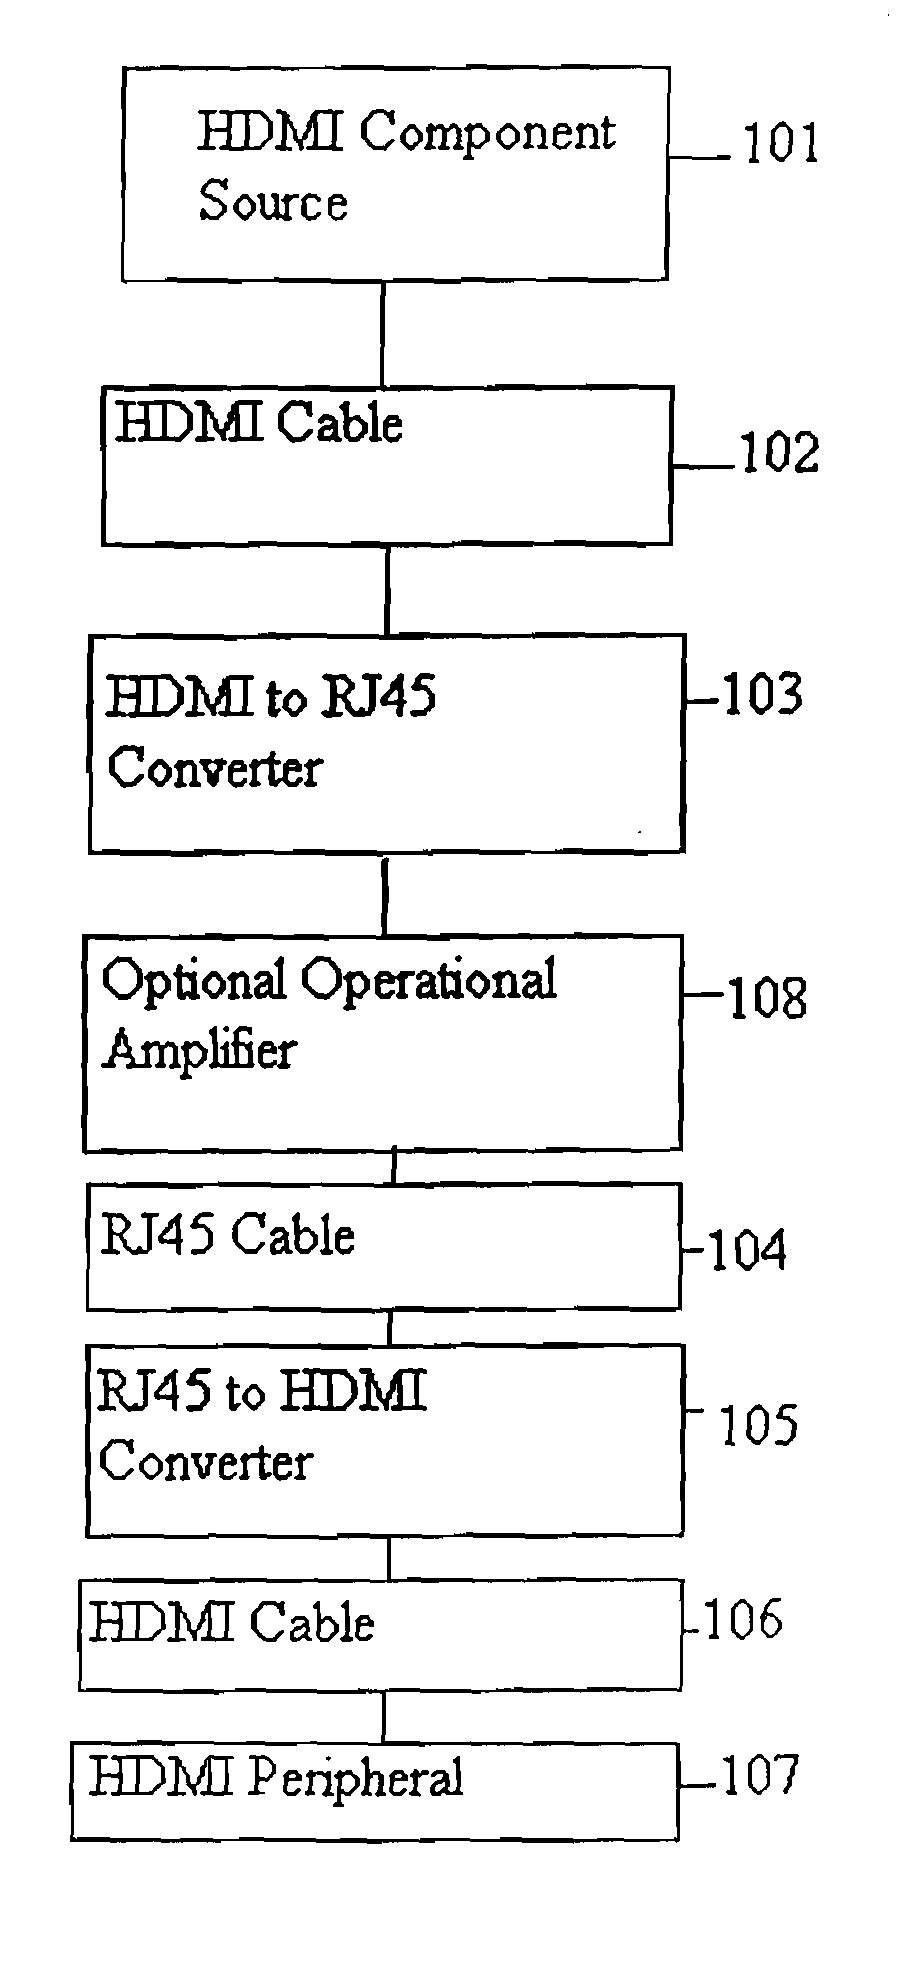 Cable Interface